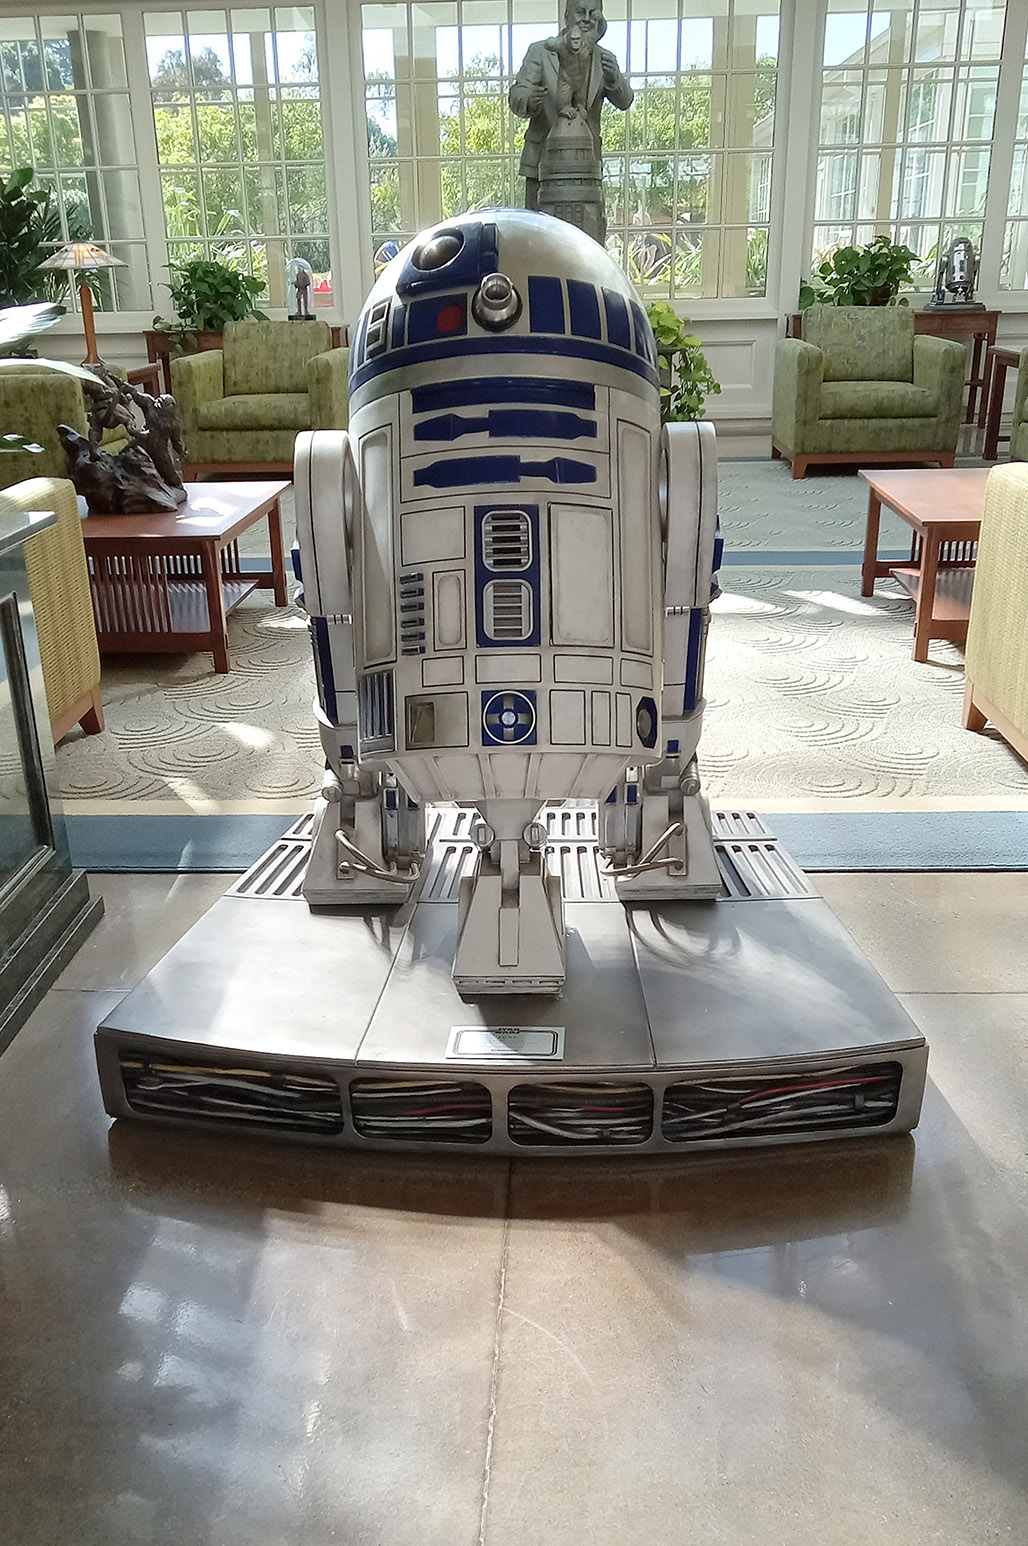 R2-D2 stands for Second Generation Robotic Droid Series-2